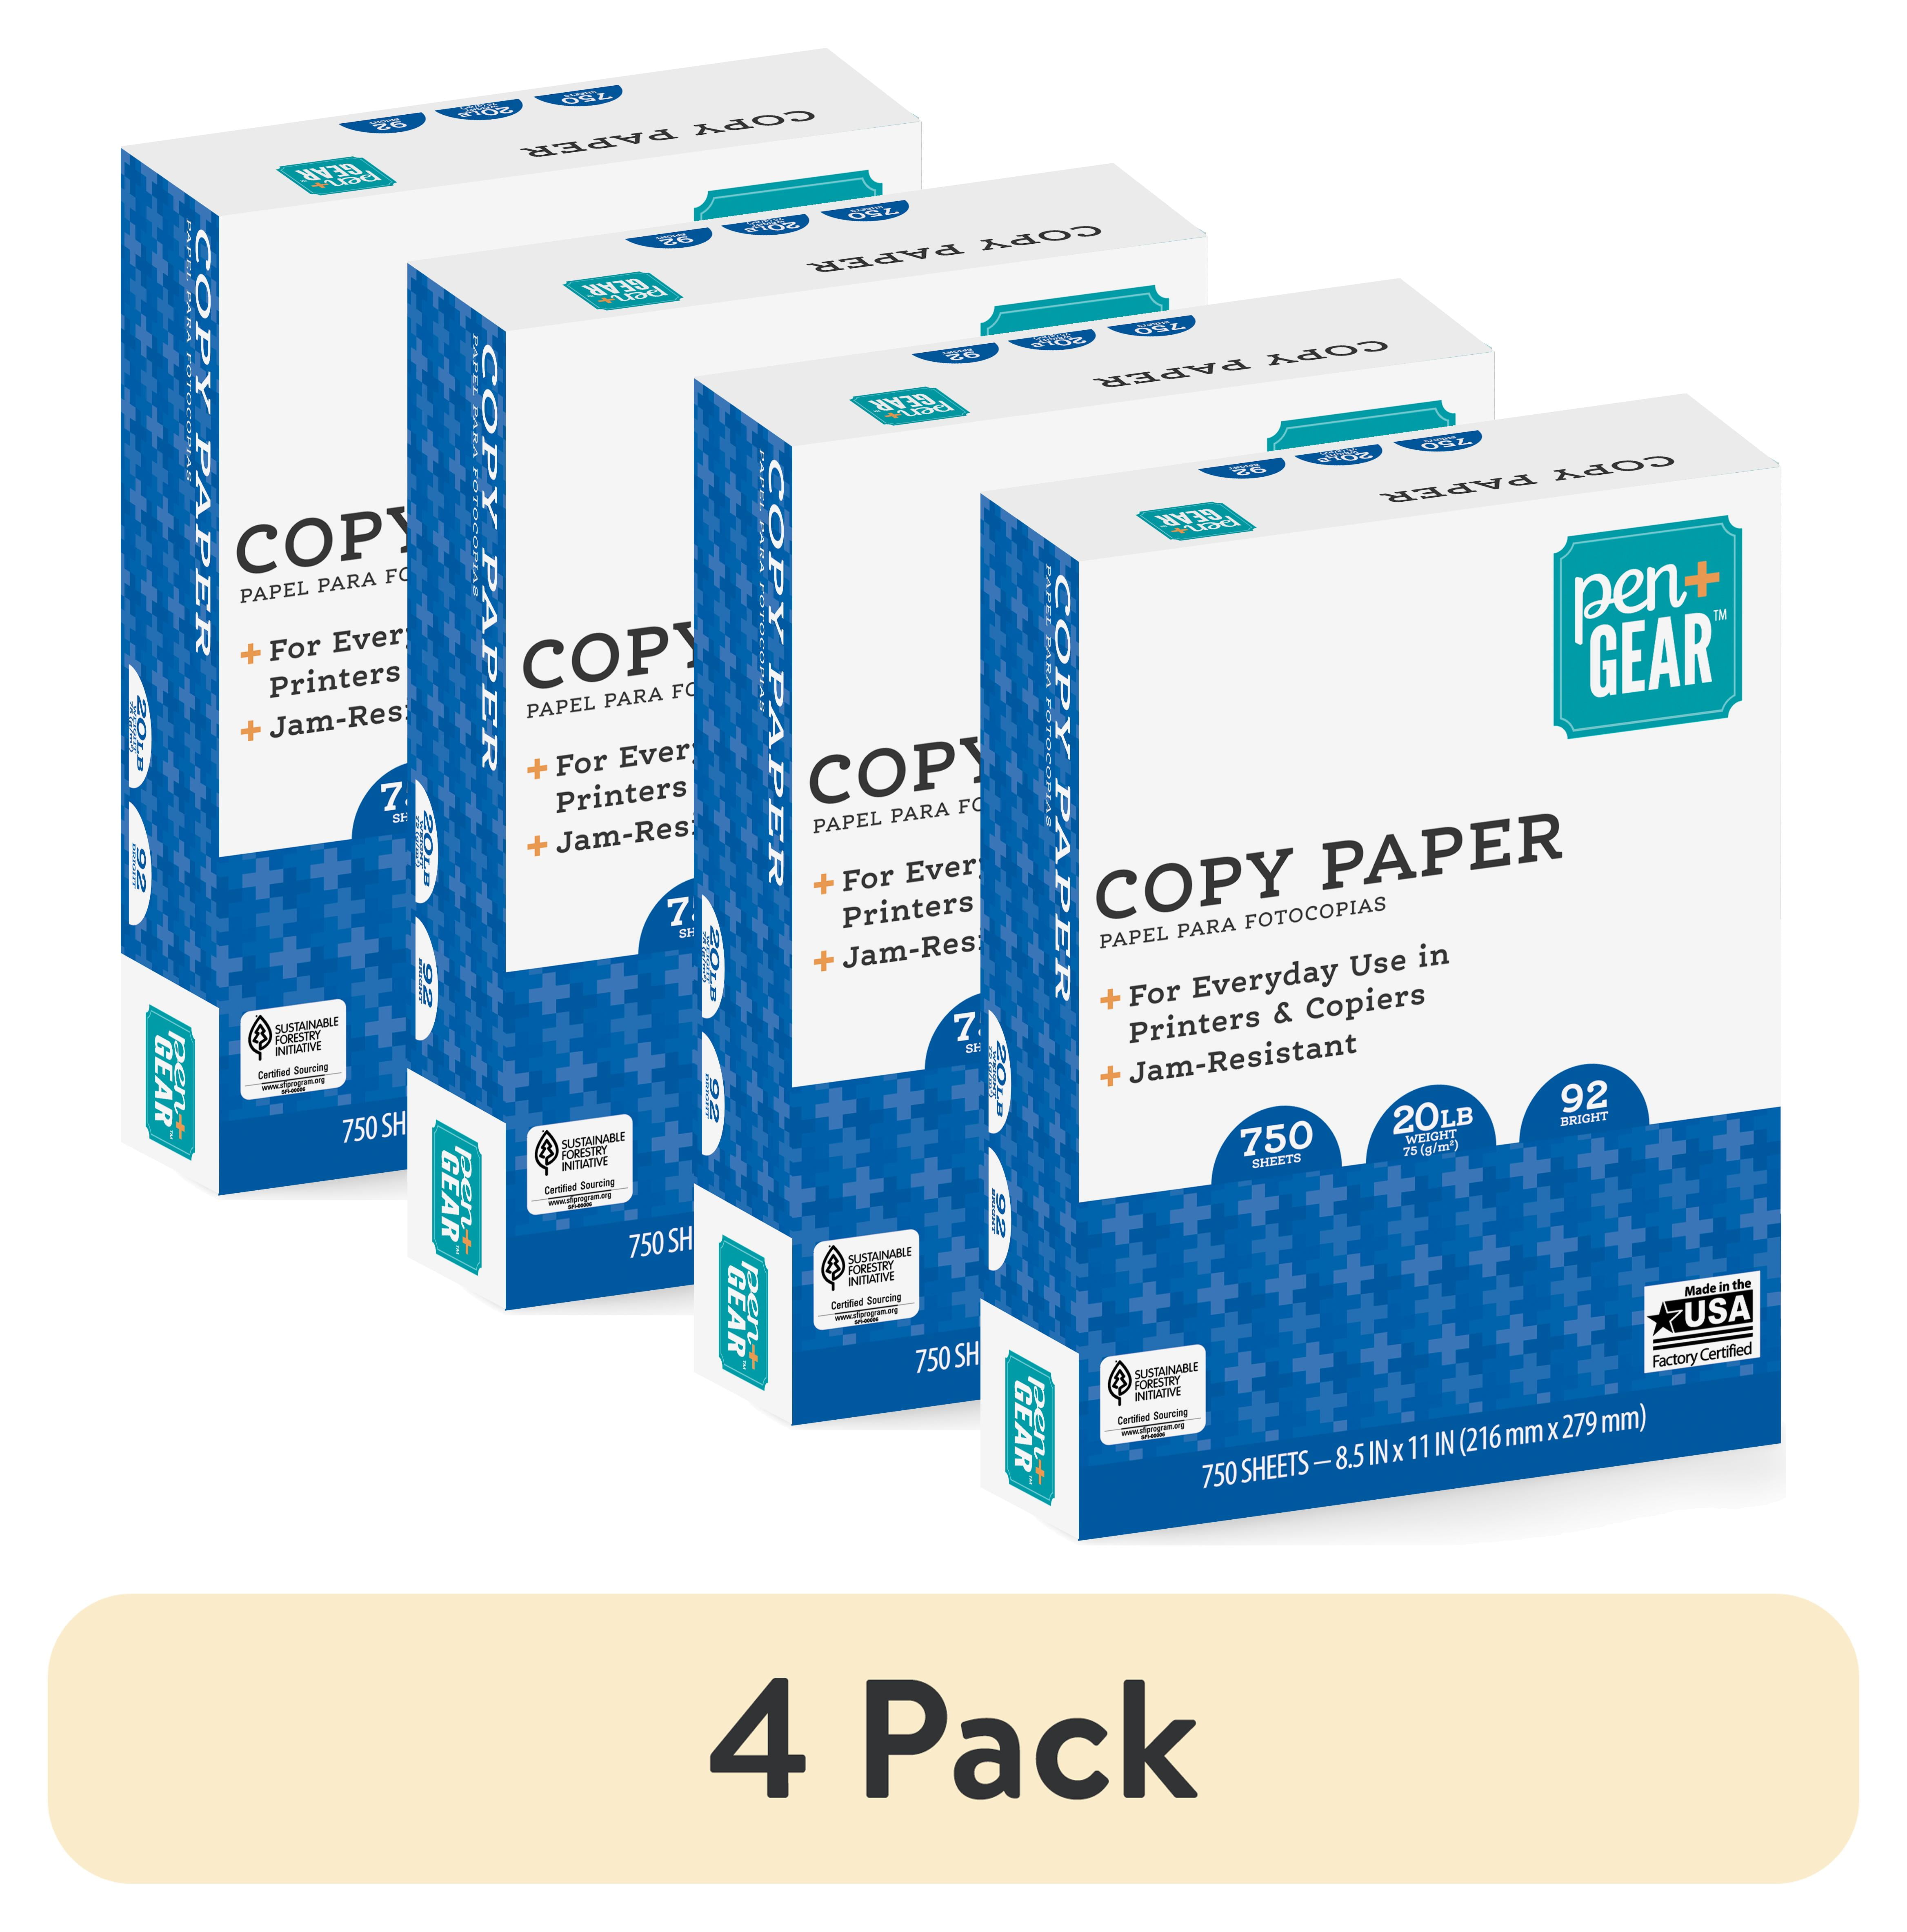   Basics Multipurpose Copy Printer Paper, 8.5 x 11, 20  lb, Pallet, 400 Reams, 200000 Sheets, 92 Bright, White : Office Products